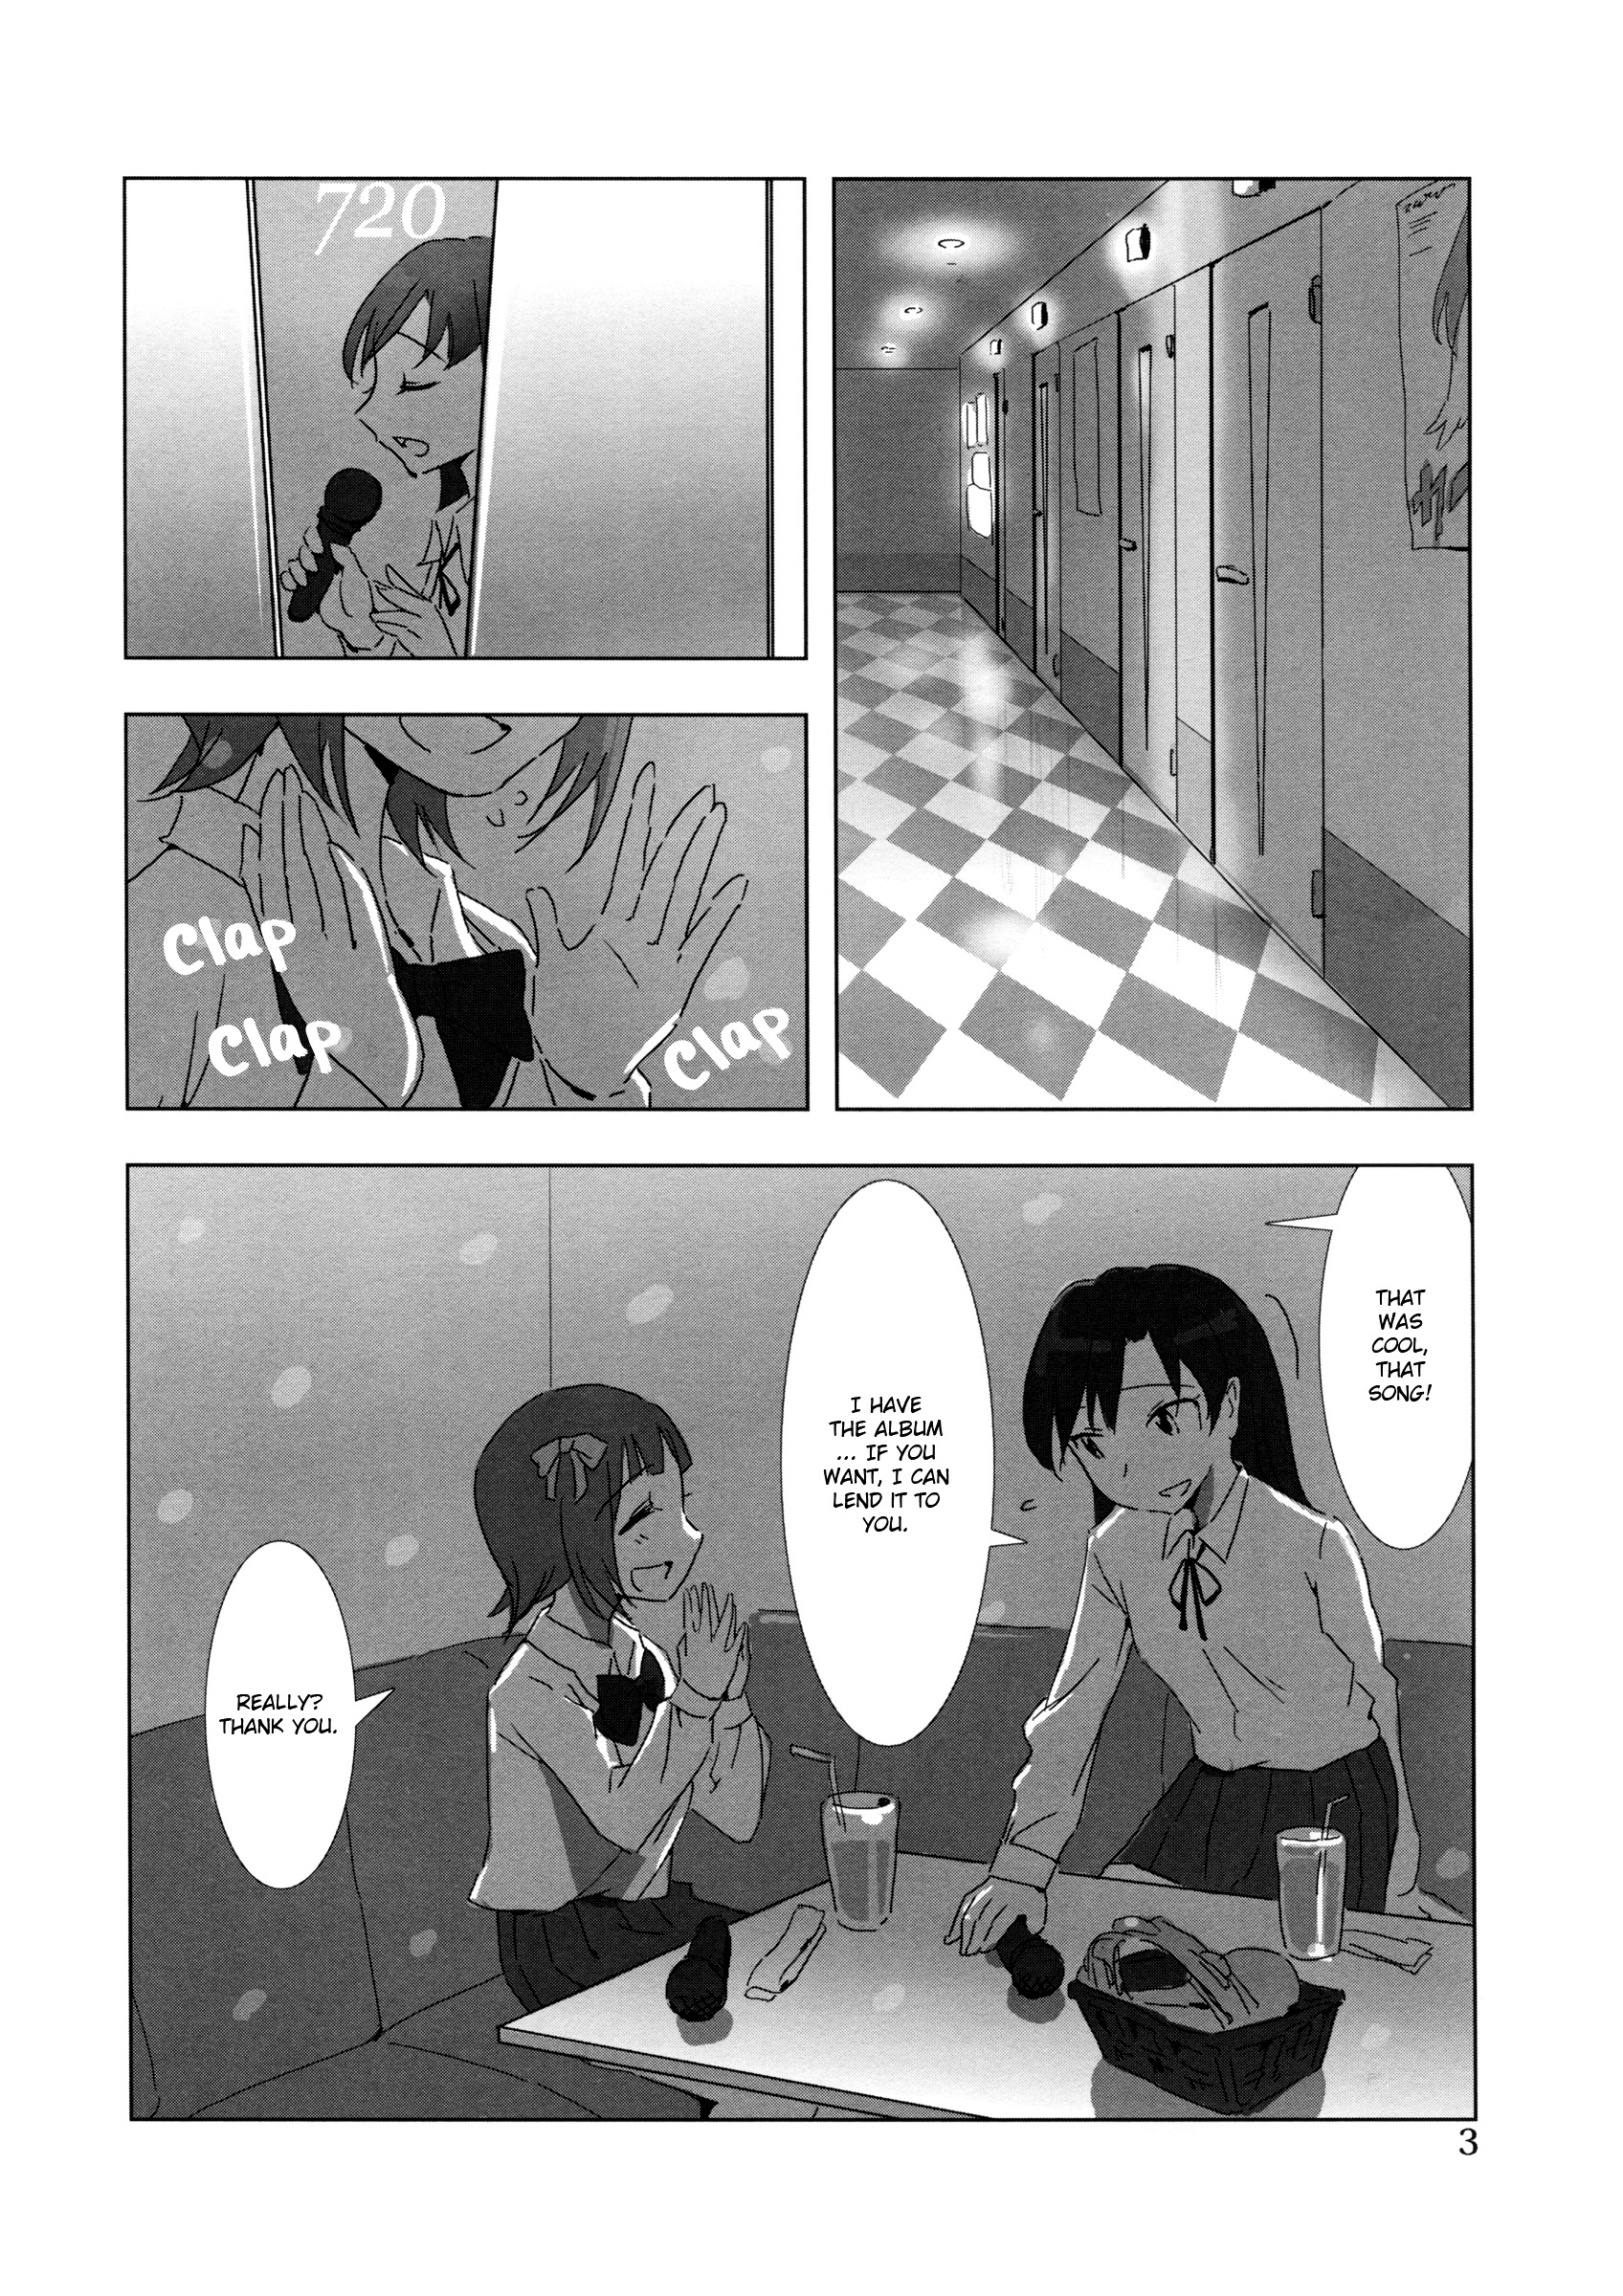 Yuri Yuri Idolm@ster: I Want To Hold You Vol.1 Chapter 1 - Picture 3